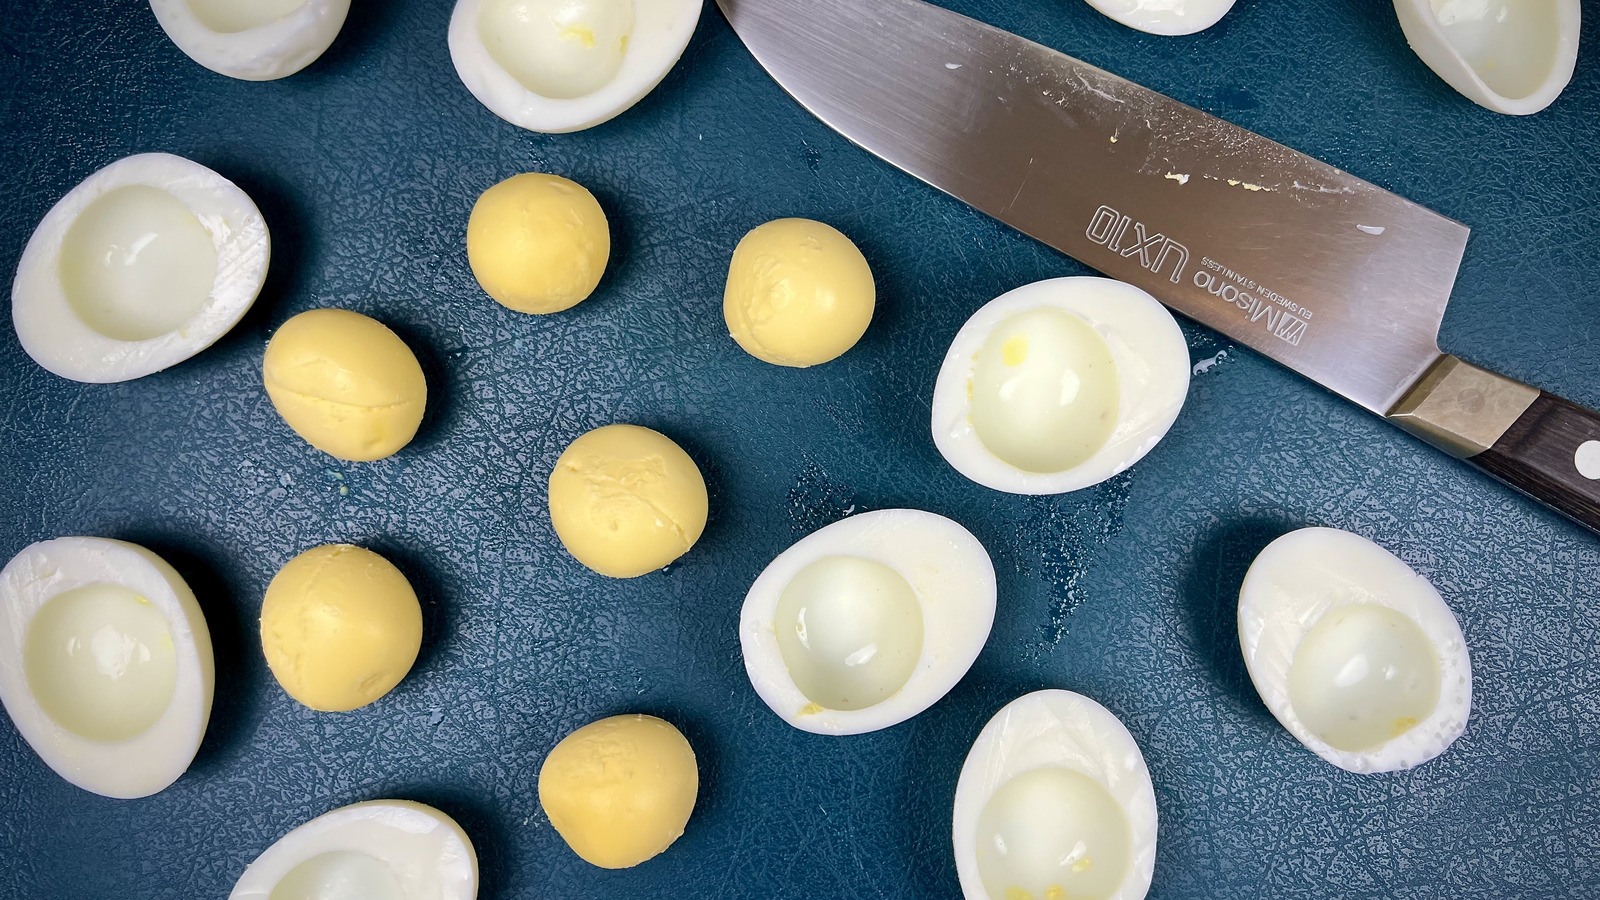 https://www.tastingtable.com/img/gallery/we-tried-the-tiktok-hard-boiled-egg-slicing-hack-and-its-everything-its-cracked-up-to-be/l-intro-1669936596.jpg